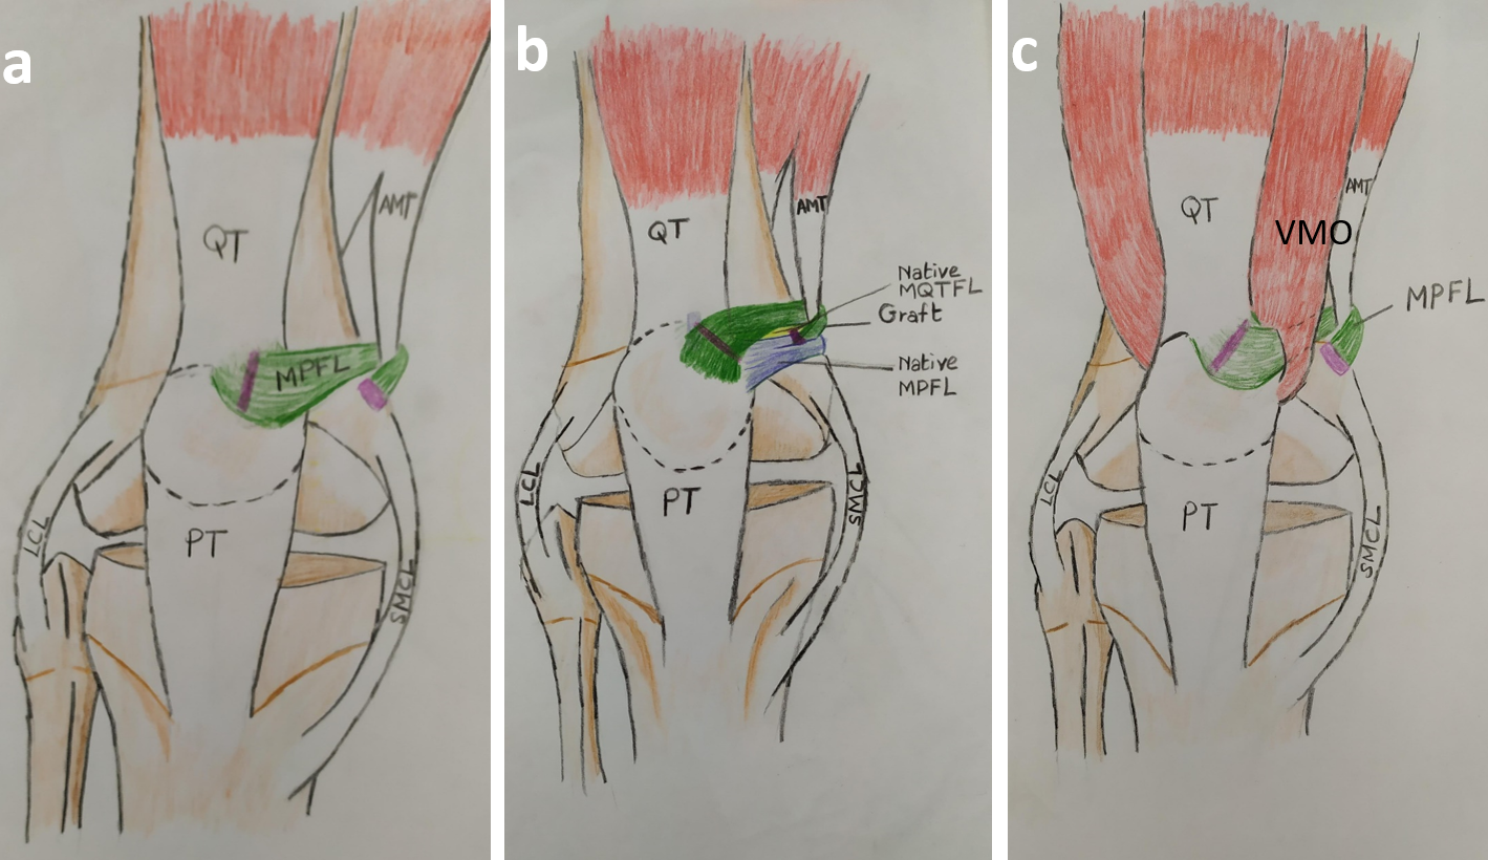 Outcomes of surgical treatment of patellar instability in children with Down syndrome